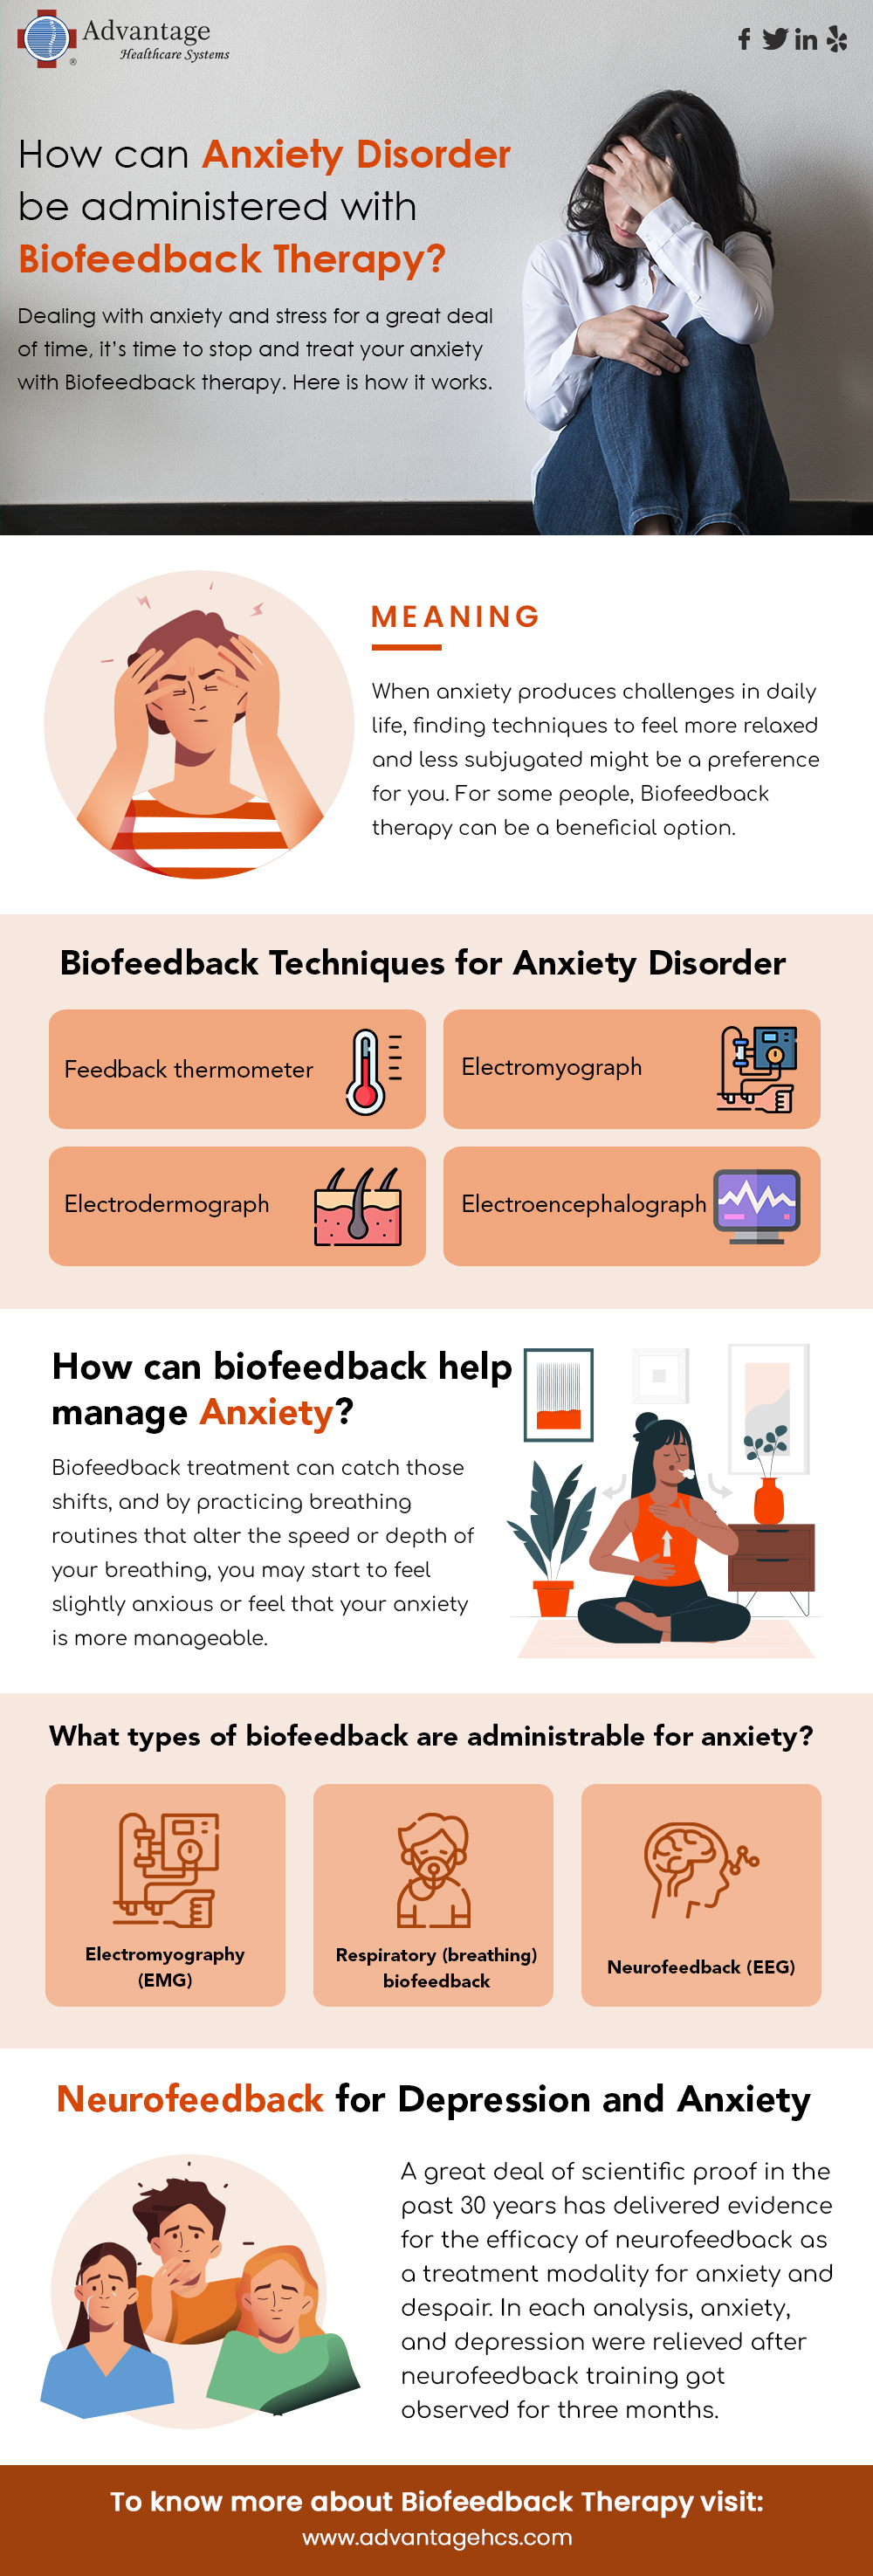 How can Anxiety Disorder be Administered with Biofeedback Therapy?